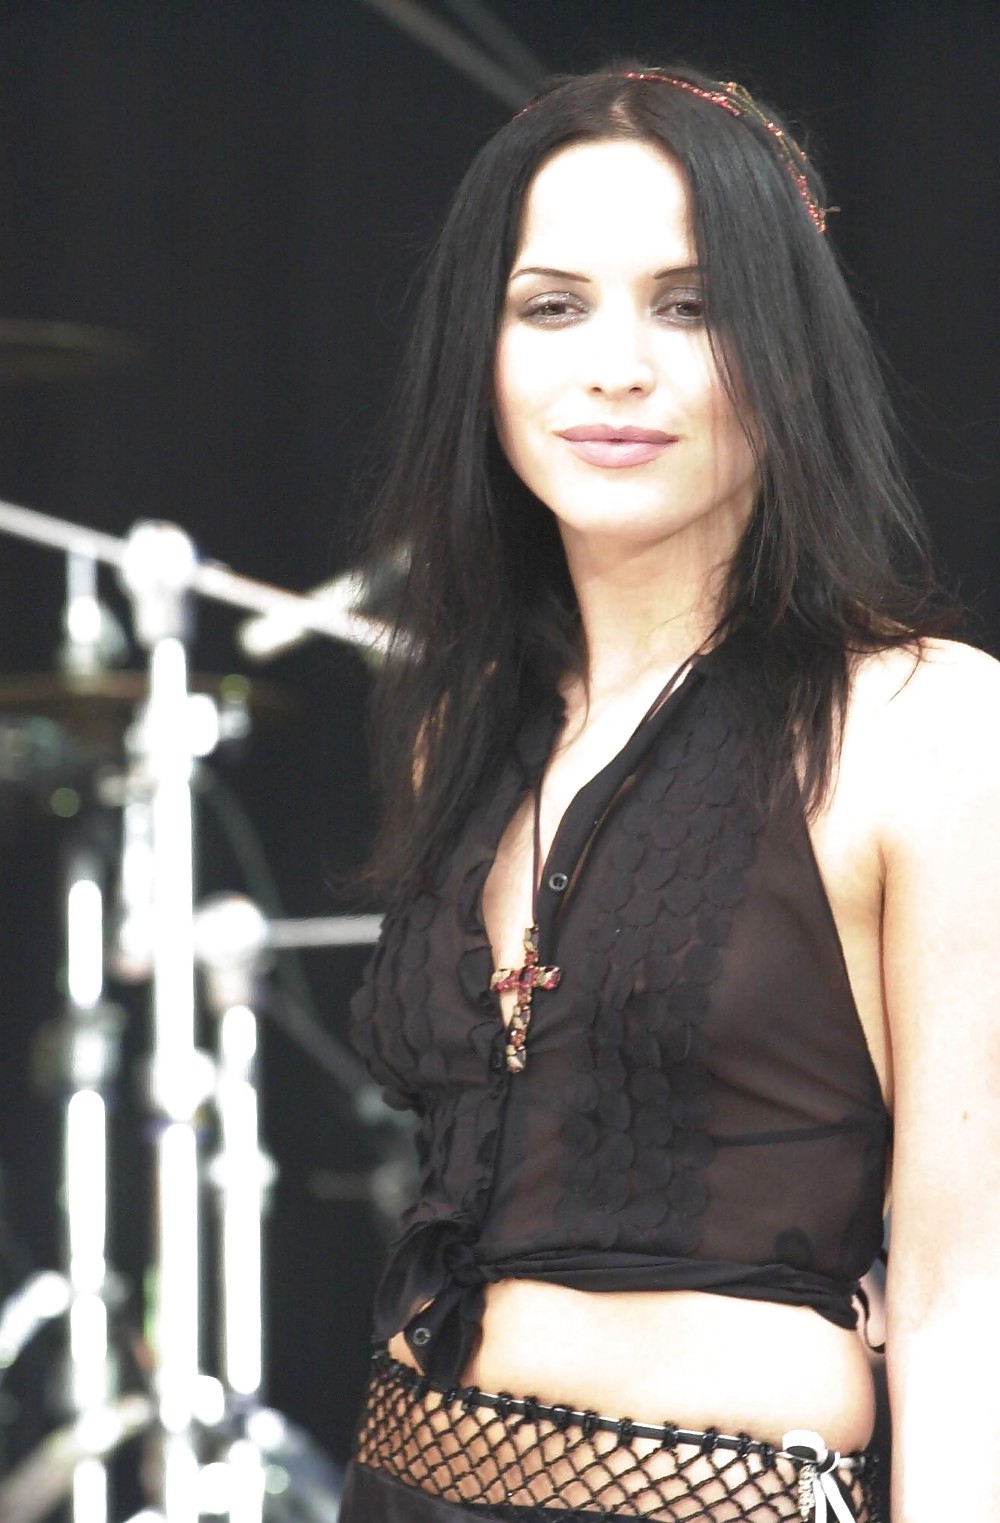 Enjoy truly the wolds most perfect celeb face Andrea Corr #37514539